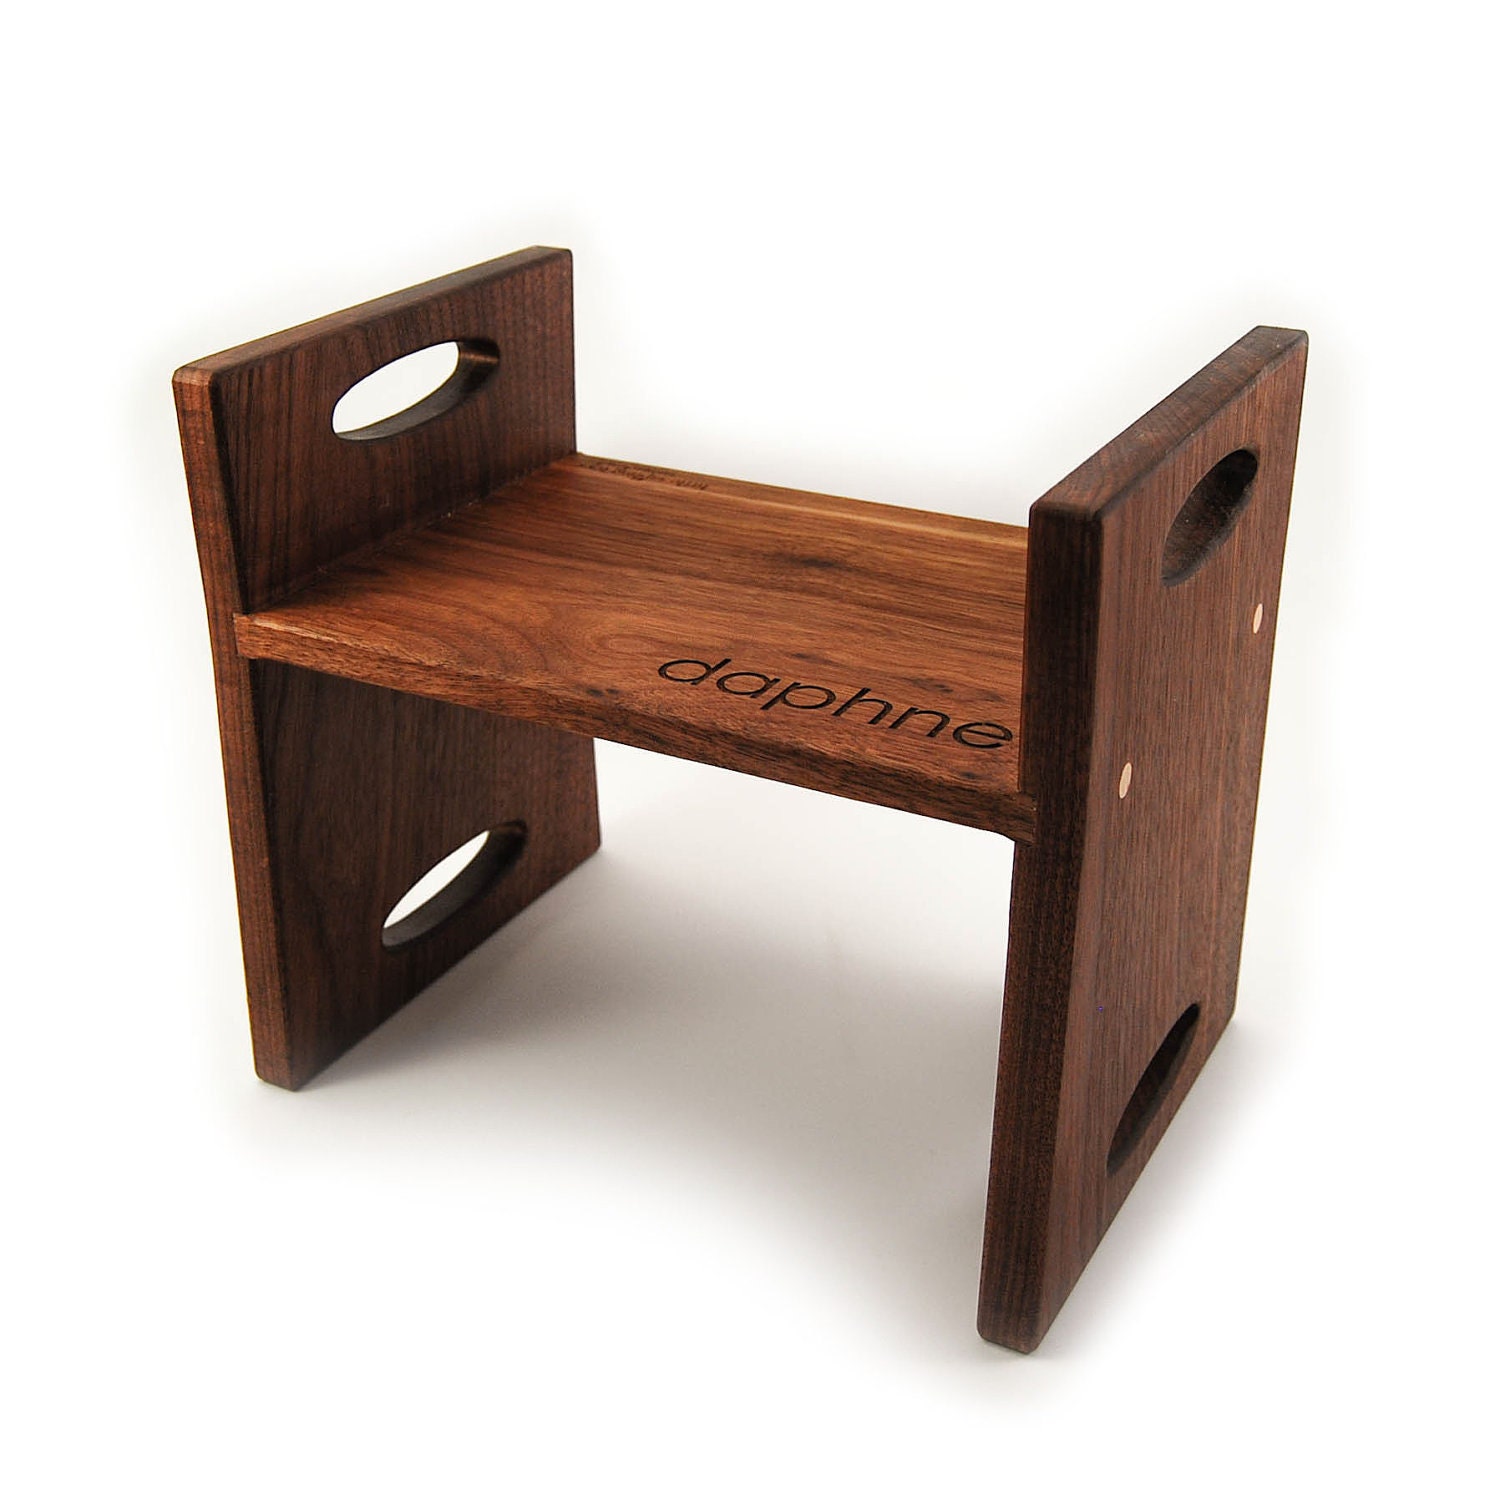 Folding Wooden Step Stool | www.woodworking.bofusfocus.com